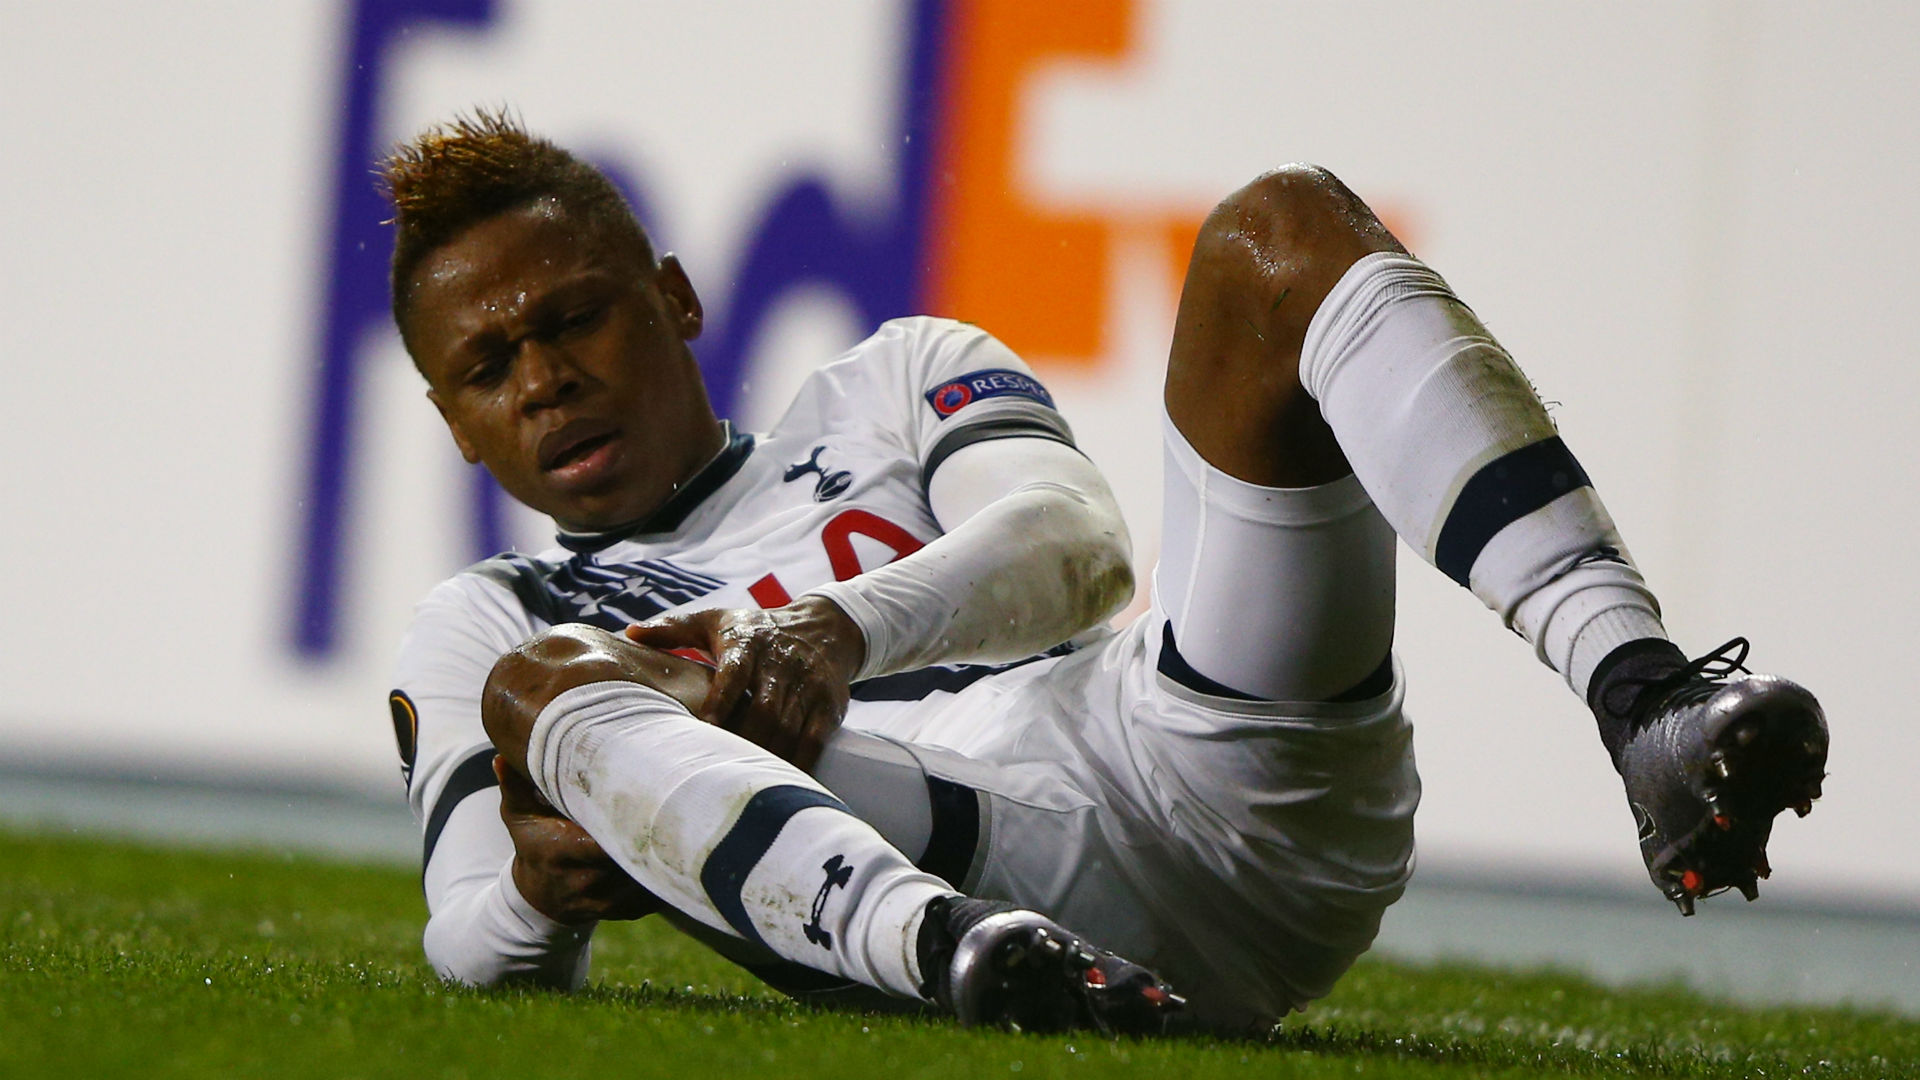 Ex-Tottenham Hotspur forward N'Jie confirms 'it is true I have received offers from England'